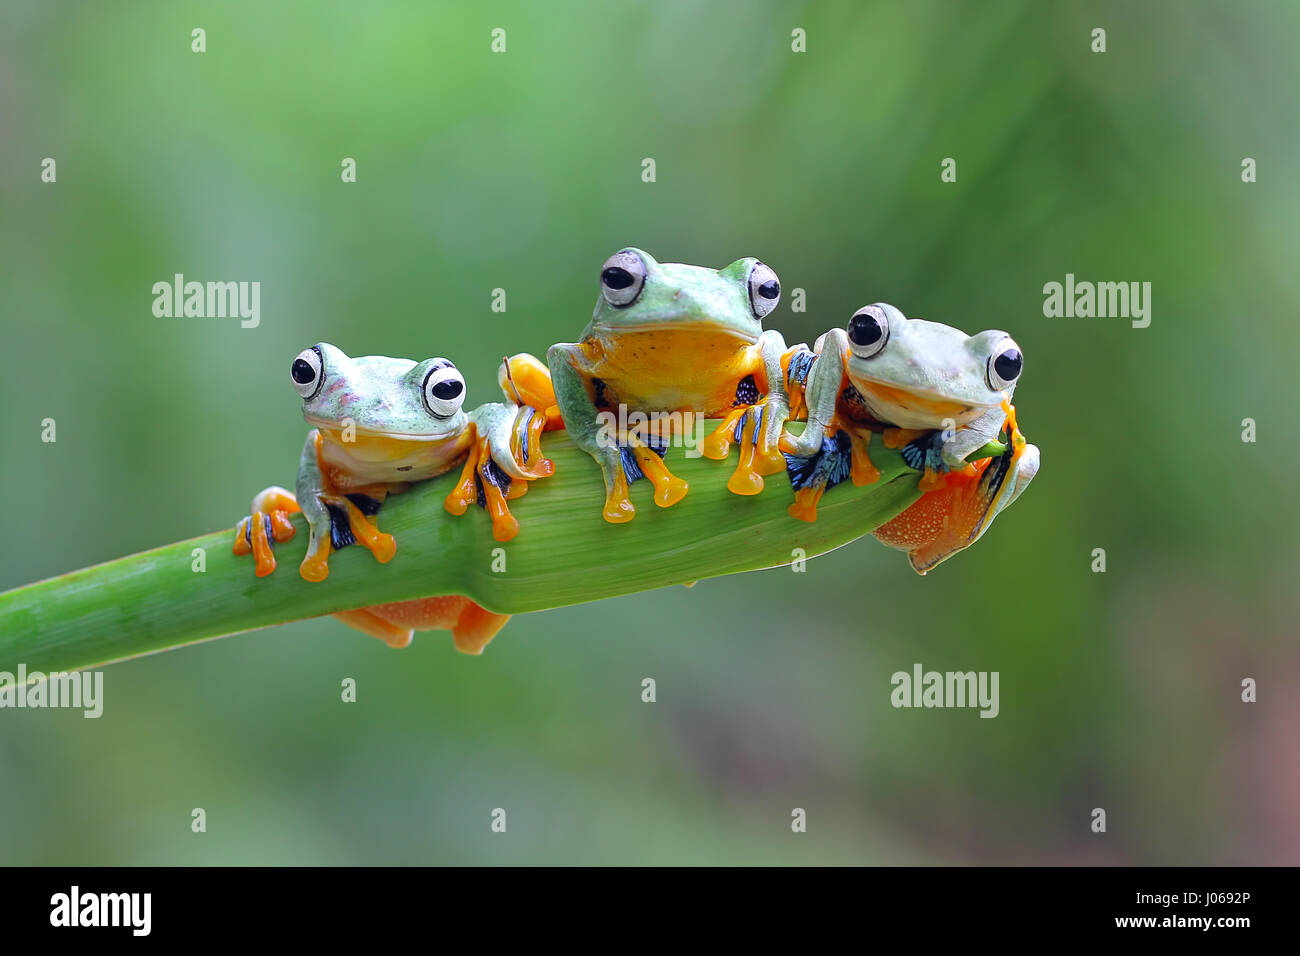 JAKARTA, INDONESIA: CUTE pictures of three little tree frogs enjoying some  downtime have been snapped by an amateur photographer. This tight trio can  be seen hanging out together enjoying a lazy day